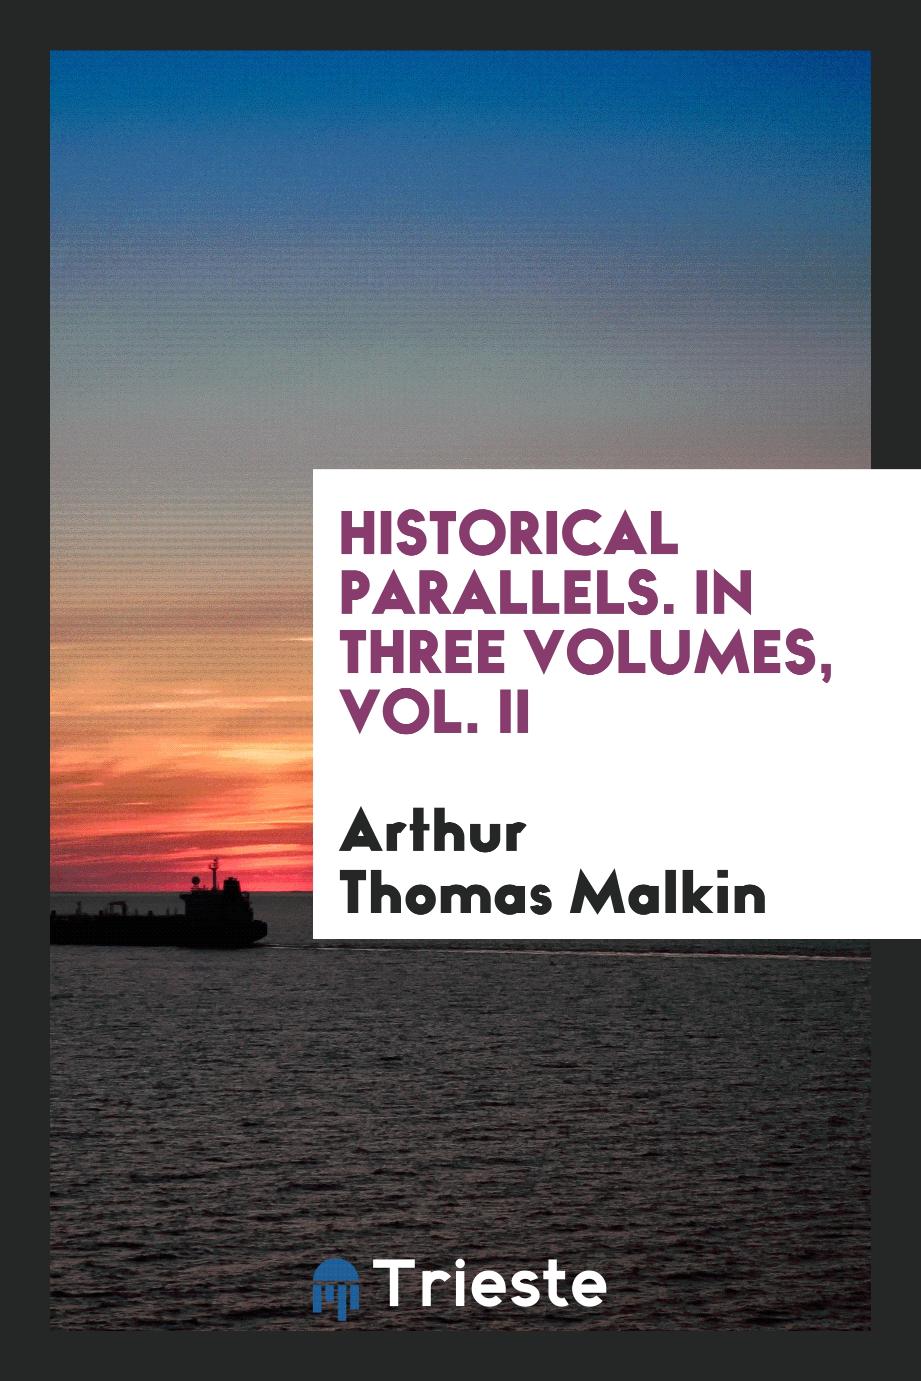 Historical parallels. In three volumes, Vol. II